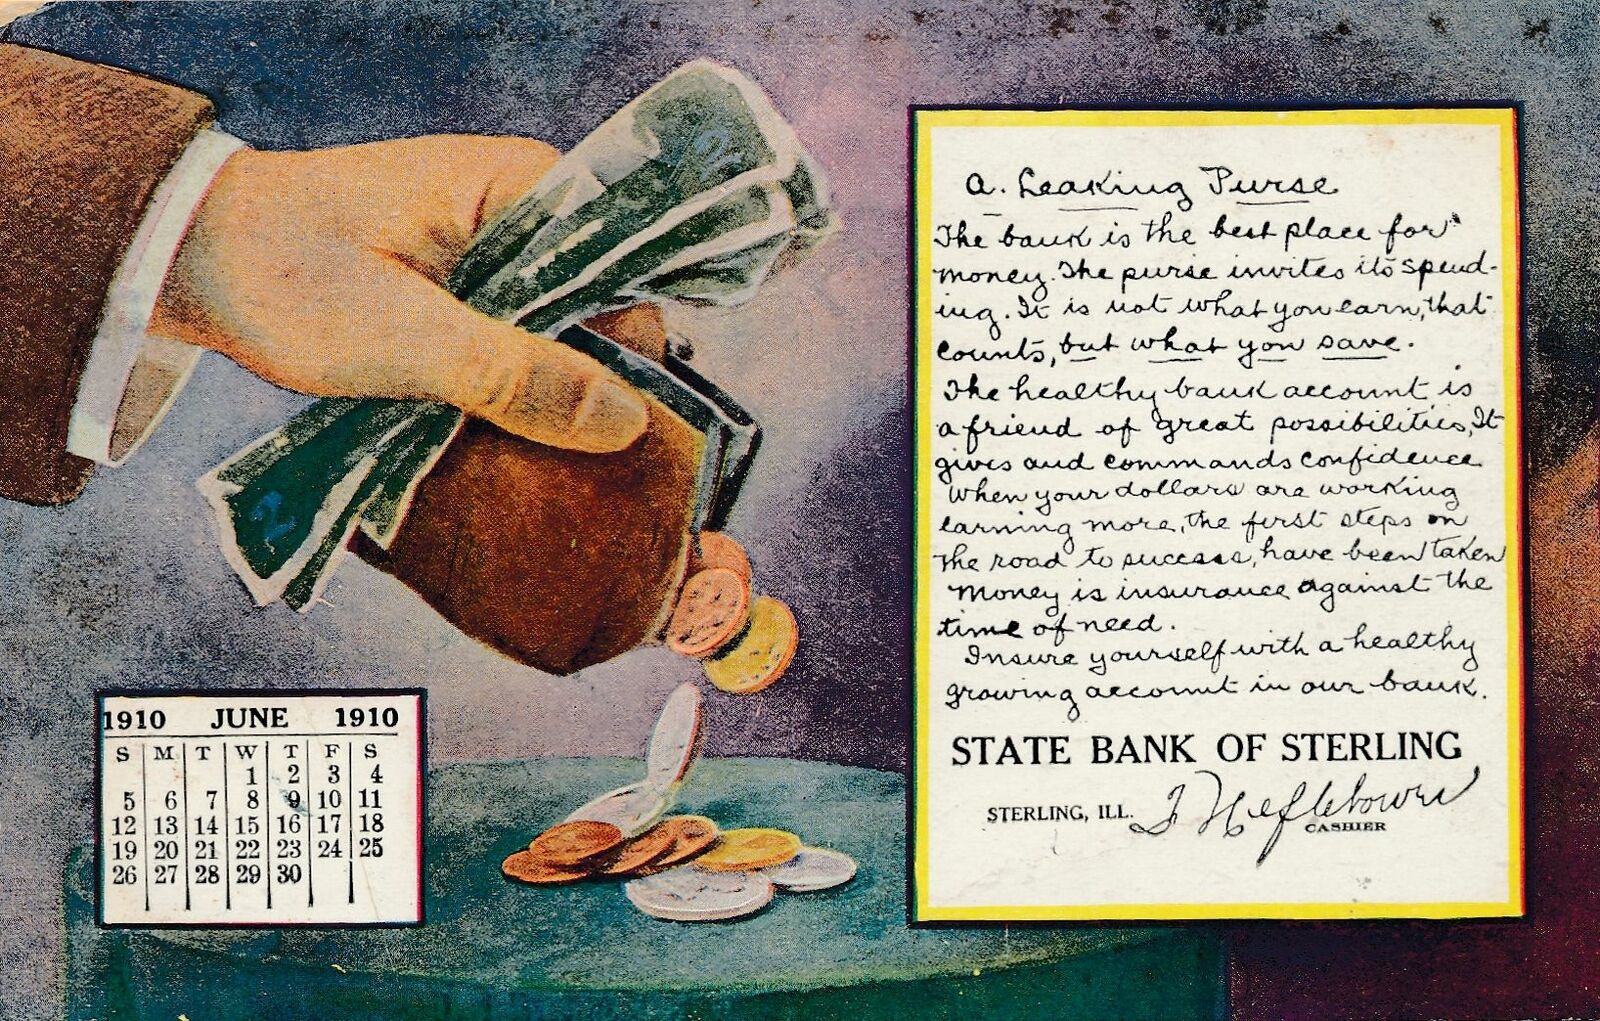 STERLING IL - State Bank of Sterling June 1910 Calendar A Leaking Purse Postcard